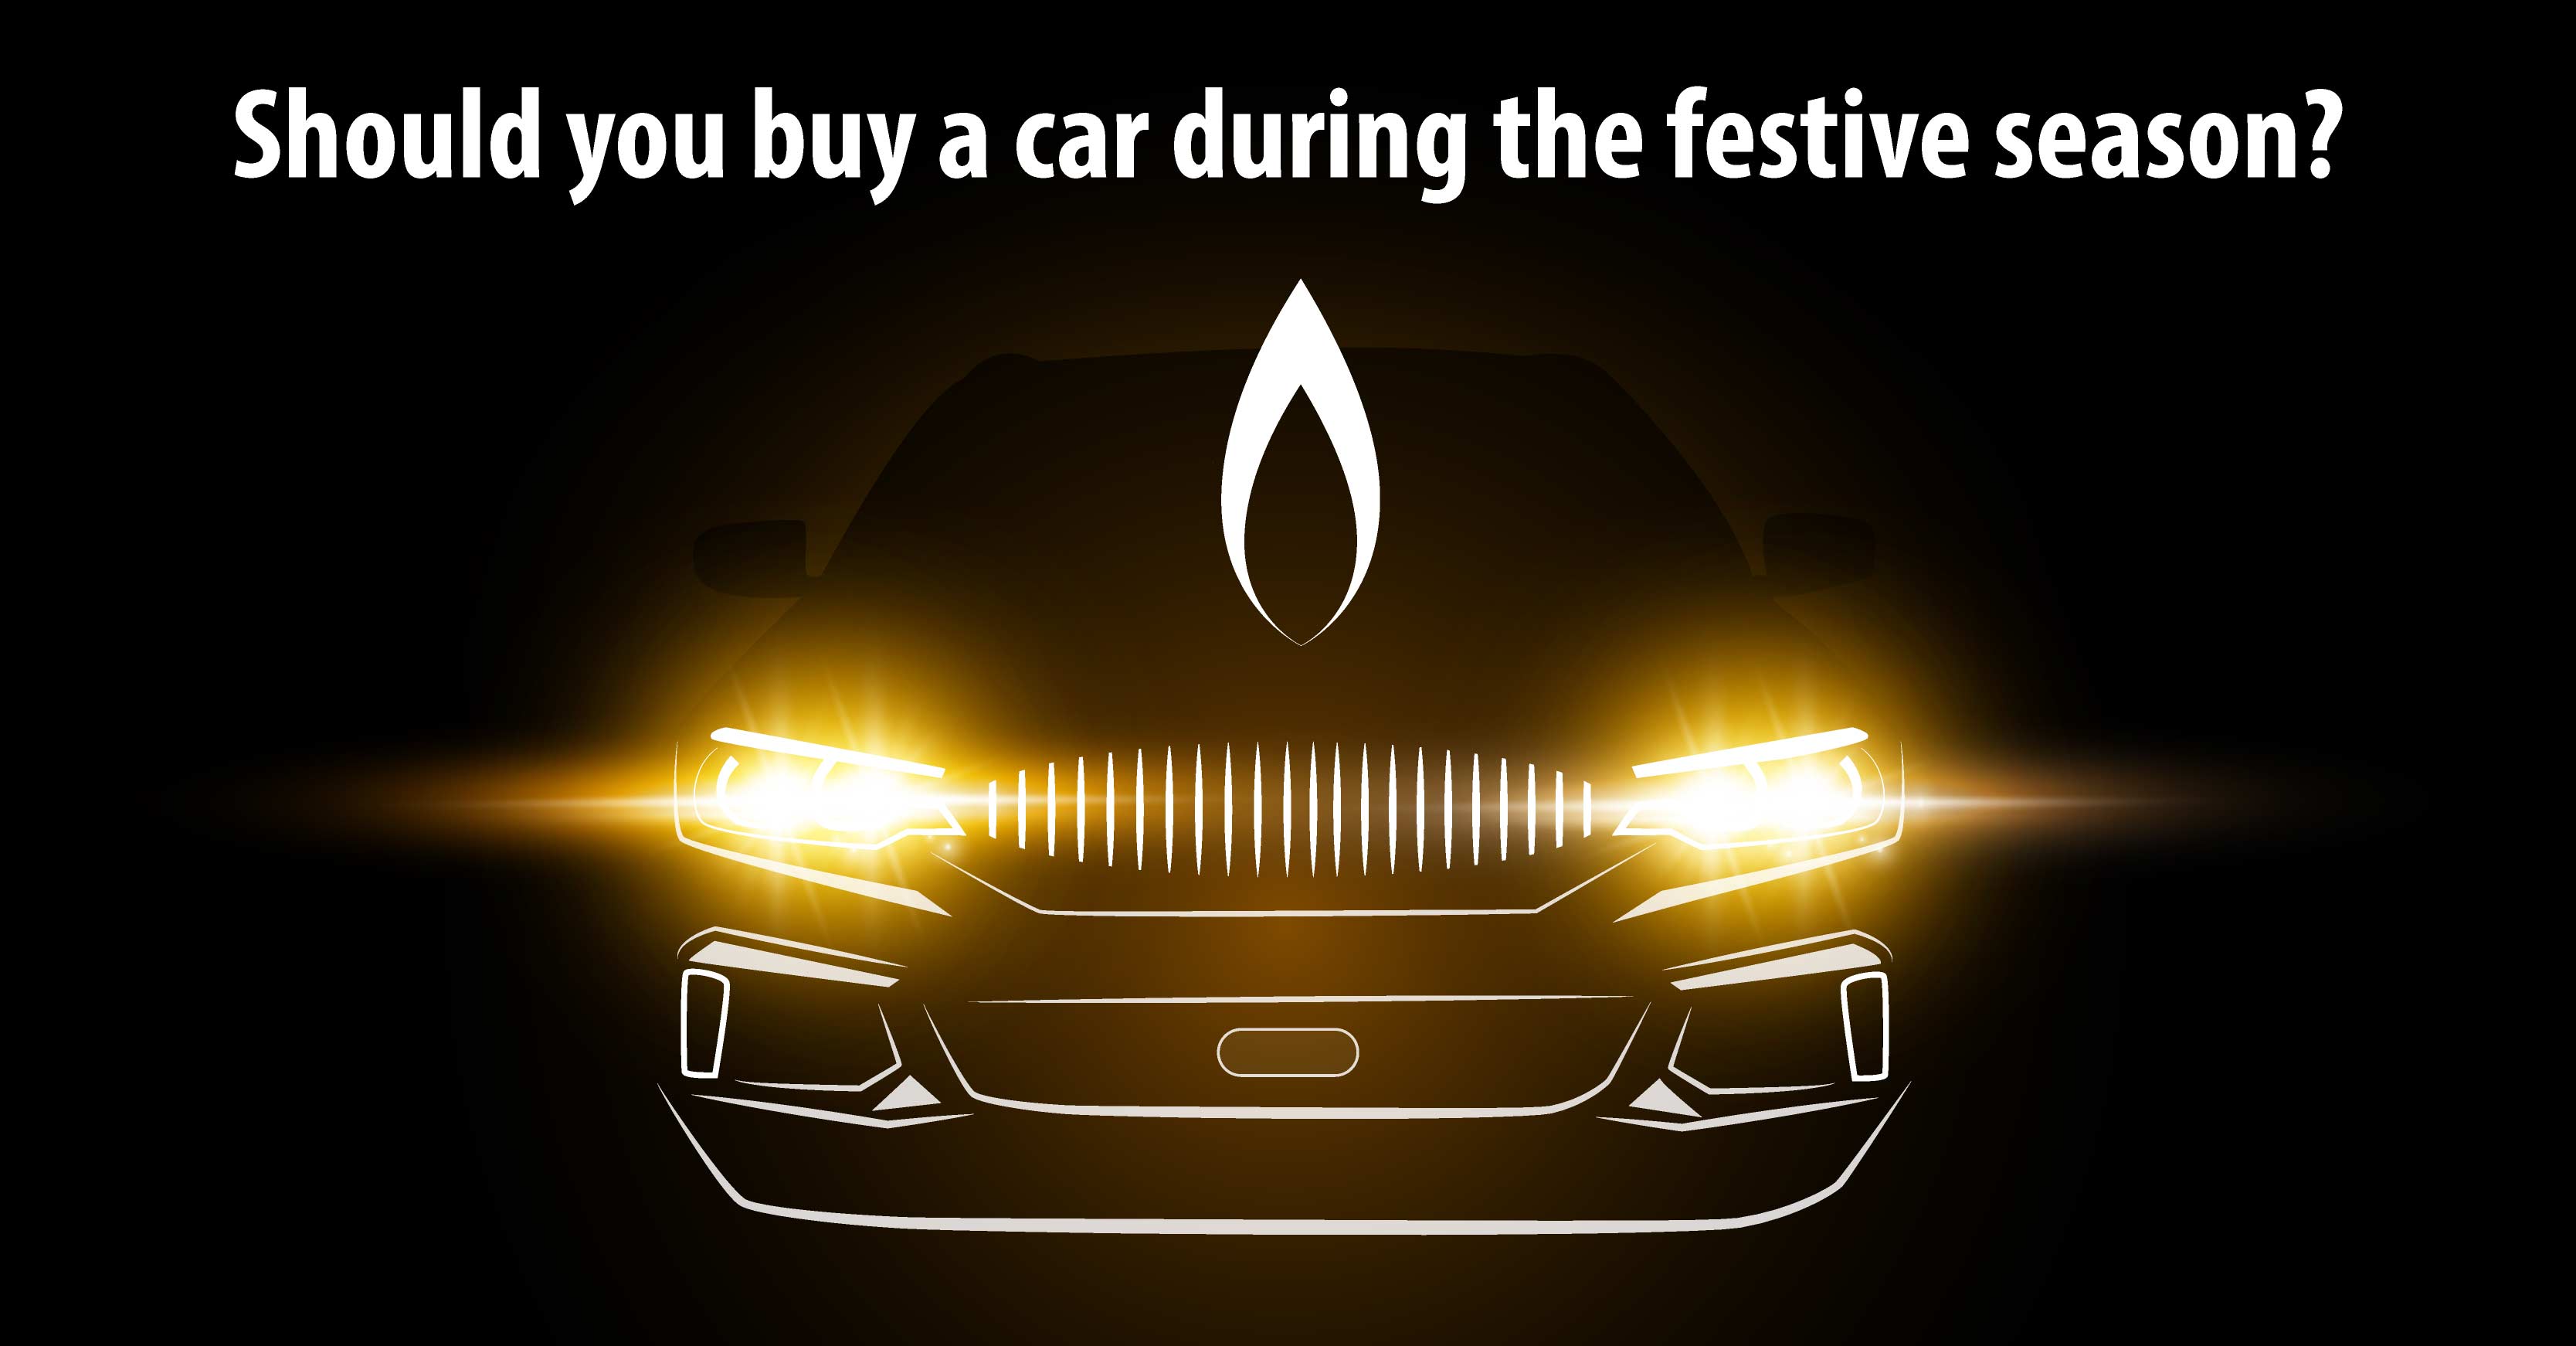 Should you buy a car during the festive season?